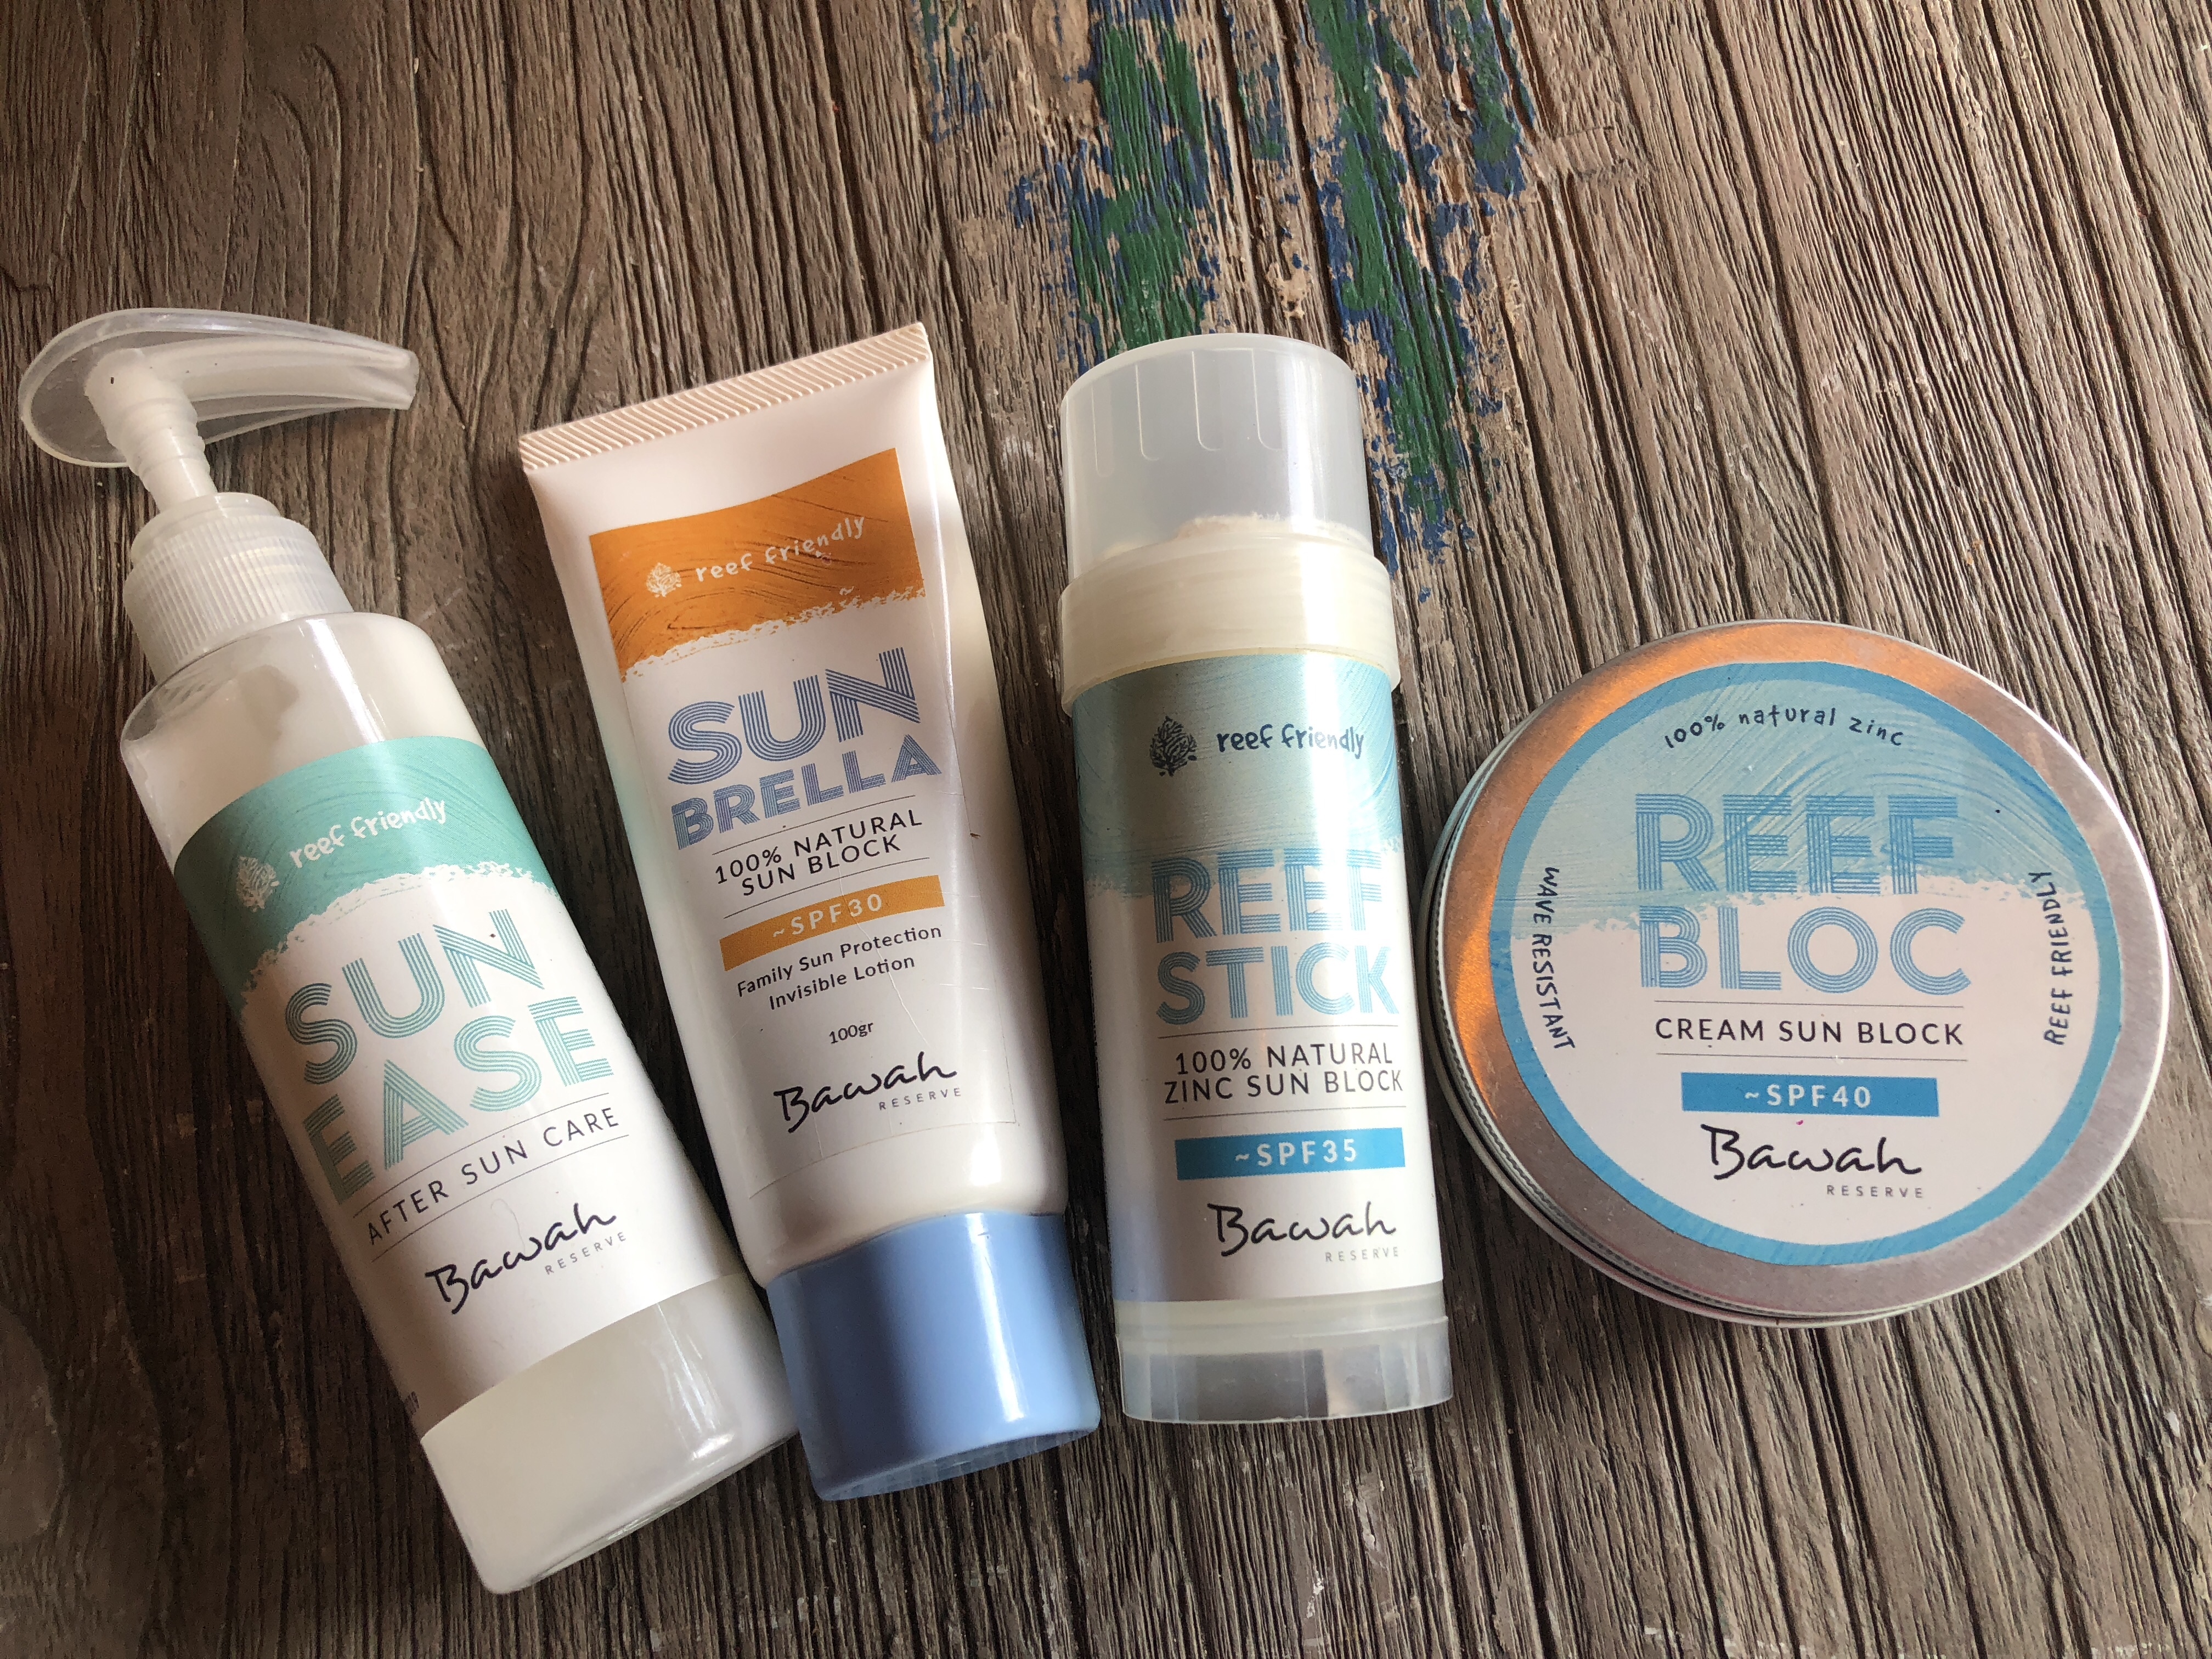 reef-friendly reef-safe sunscreen and suncream at Bawah Reserve, Indonesia